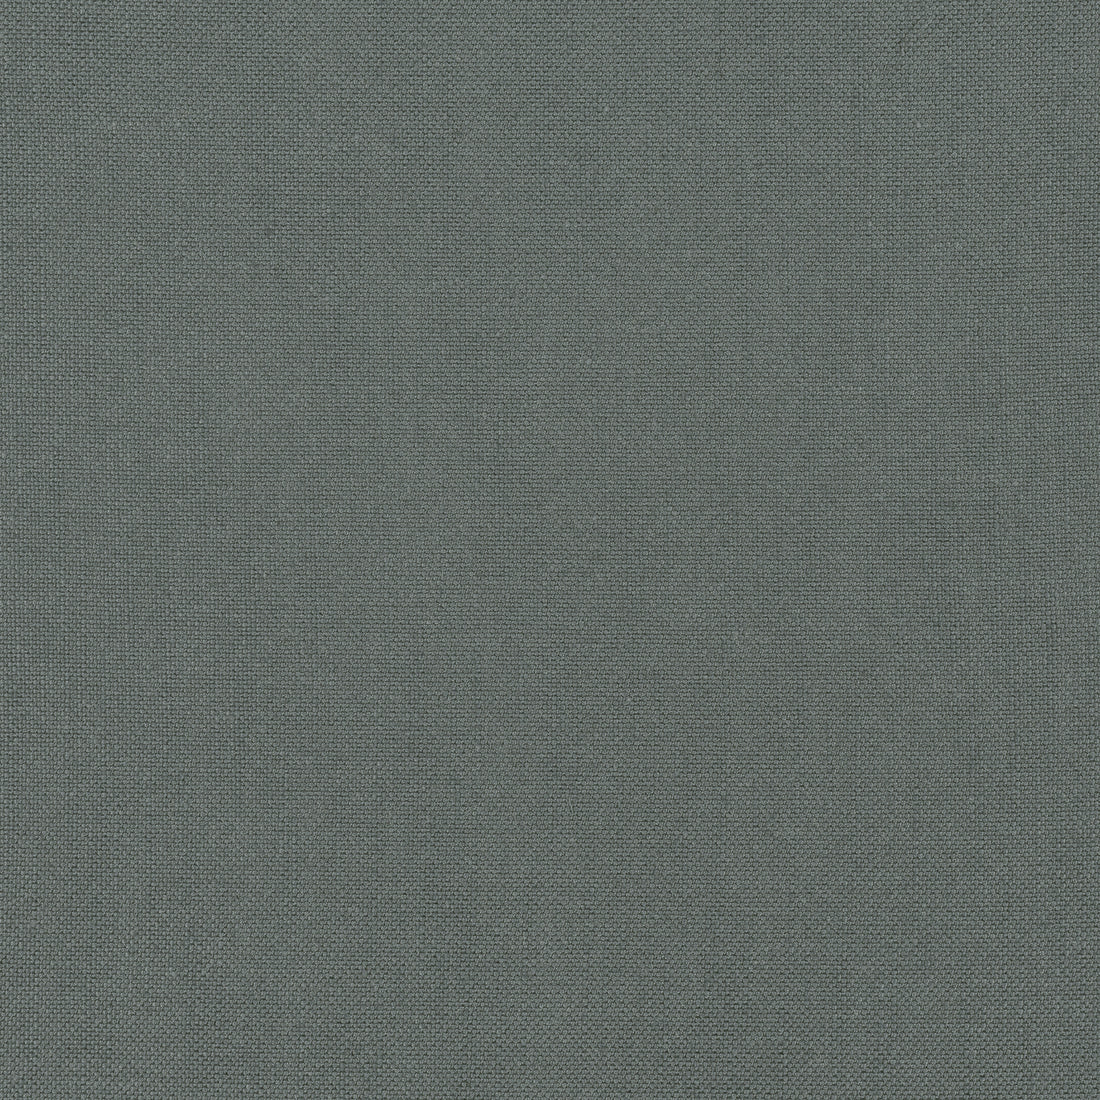 Palisade Linen fabric in charcoal color - pattern number FWW7662 - by Thibaut in the Palisades collection